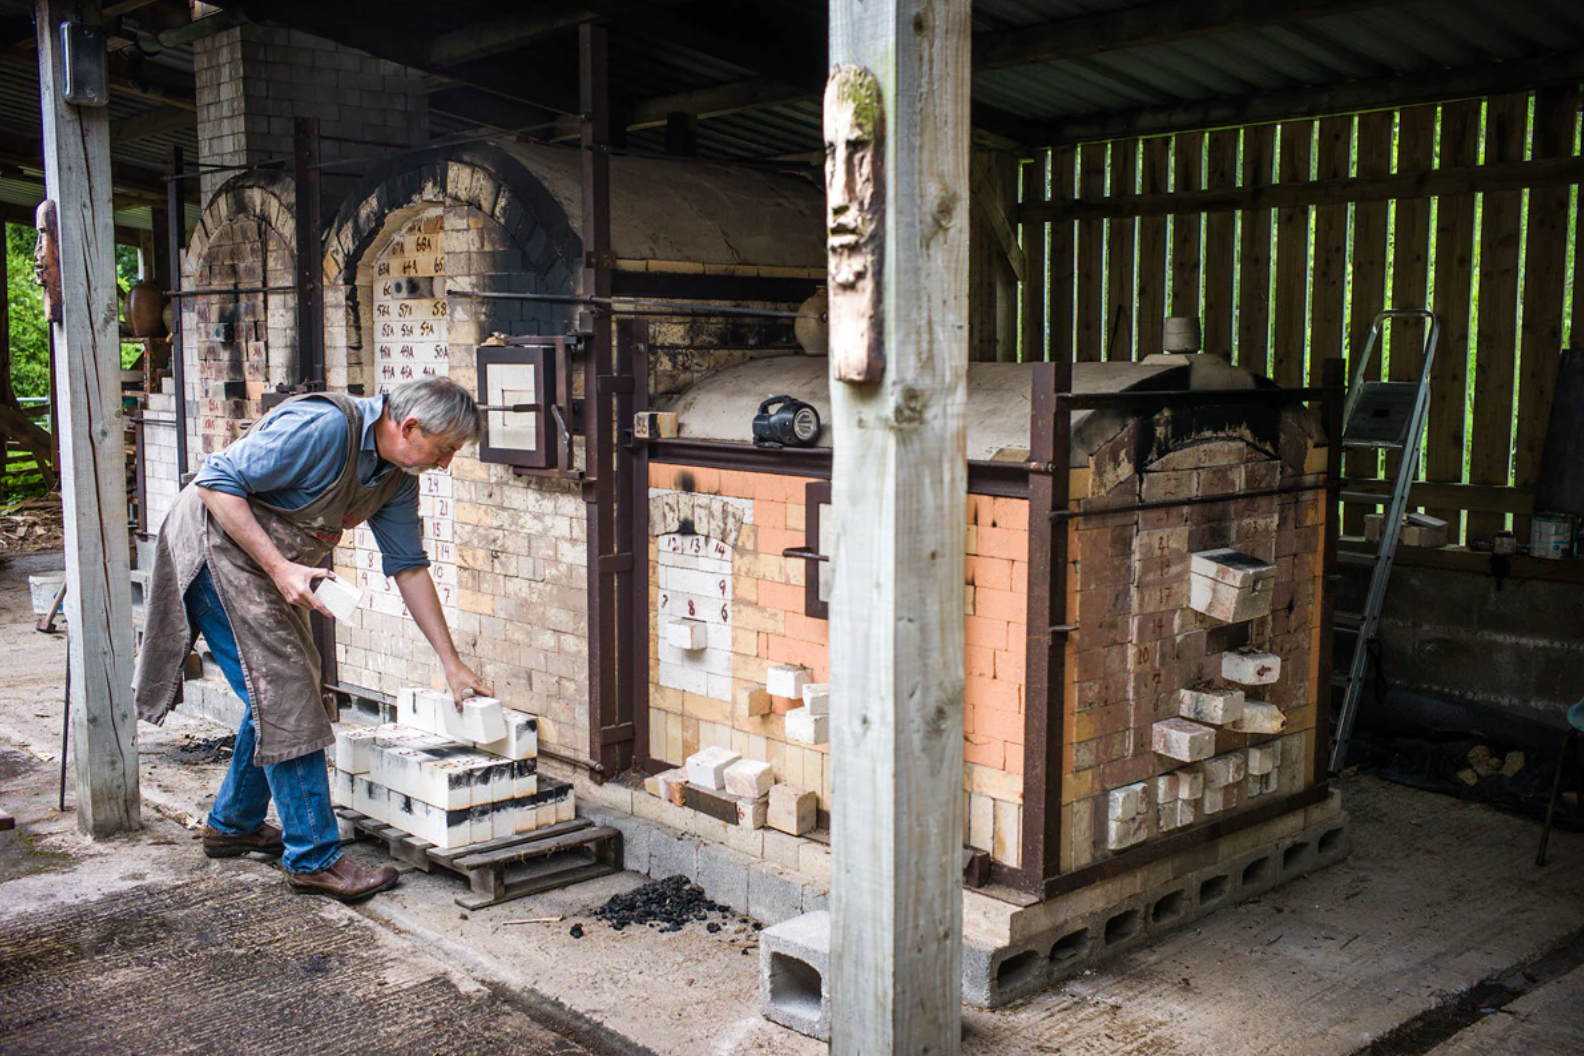 Phil's two-chamber wood-kiln being unpacked